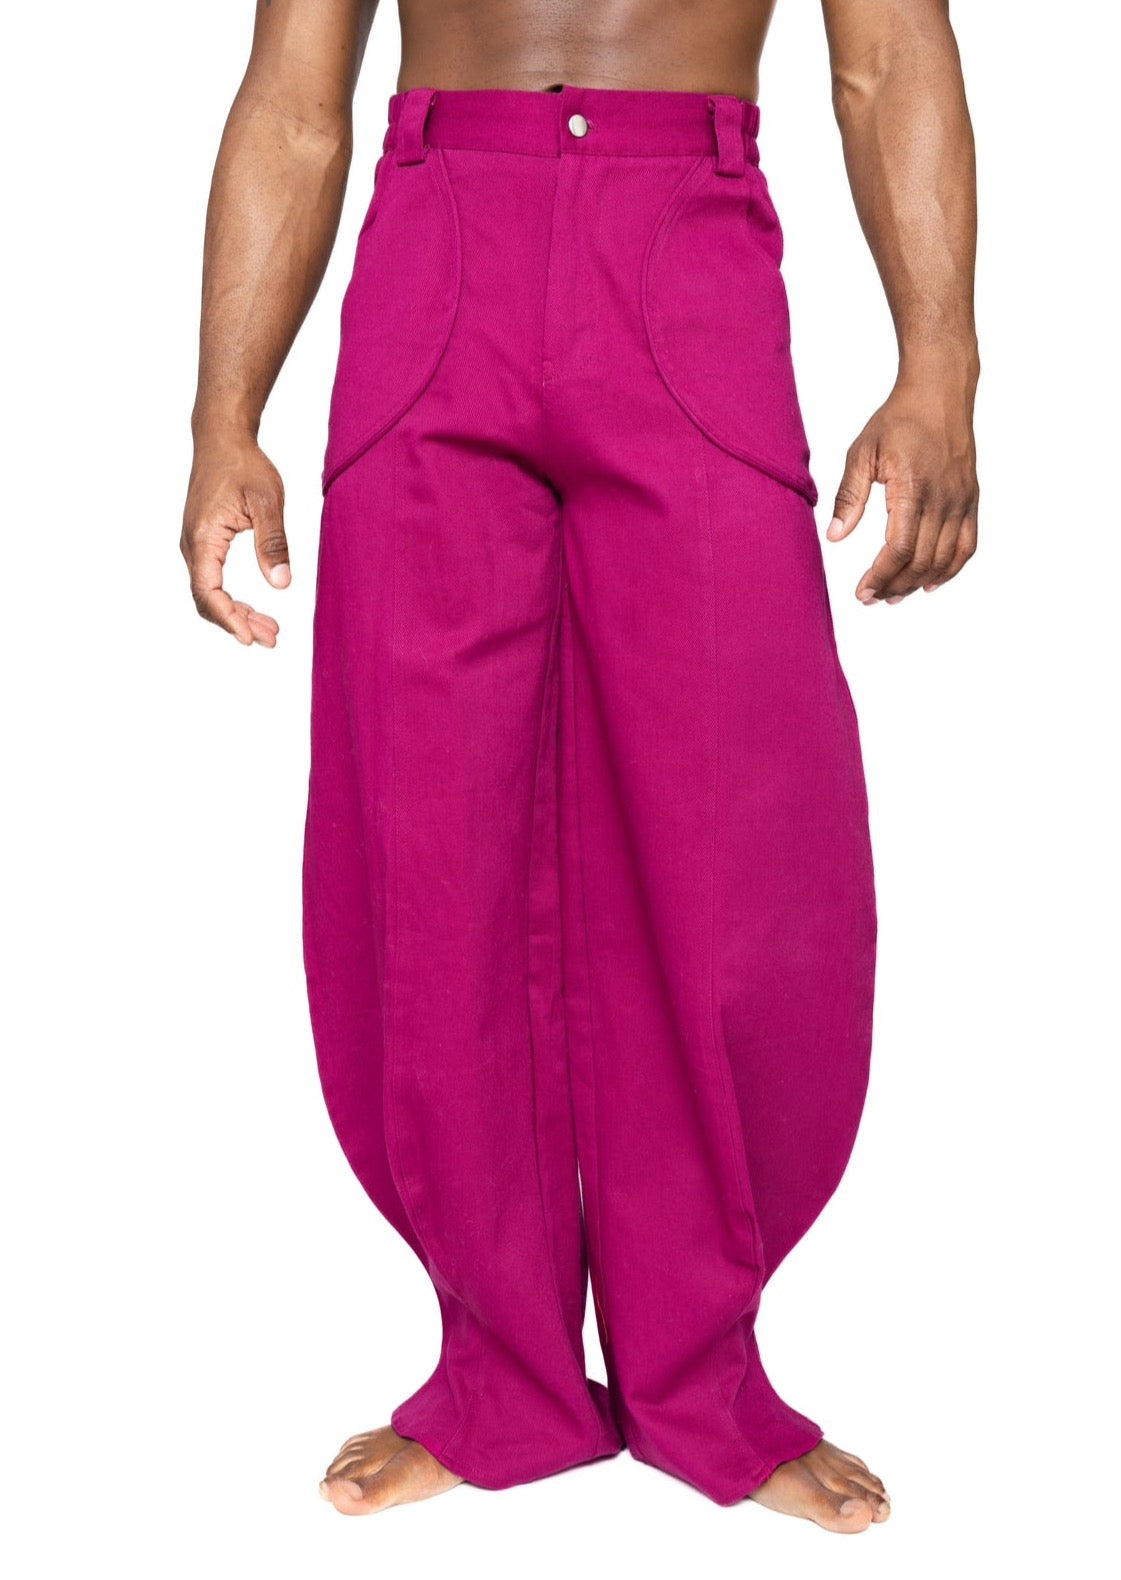 The Hibiscus Light Weight Summer Pants